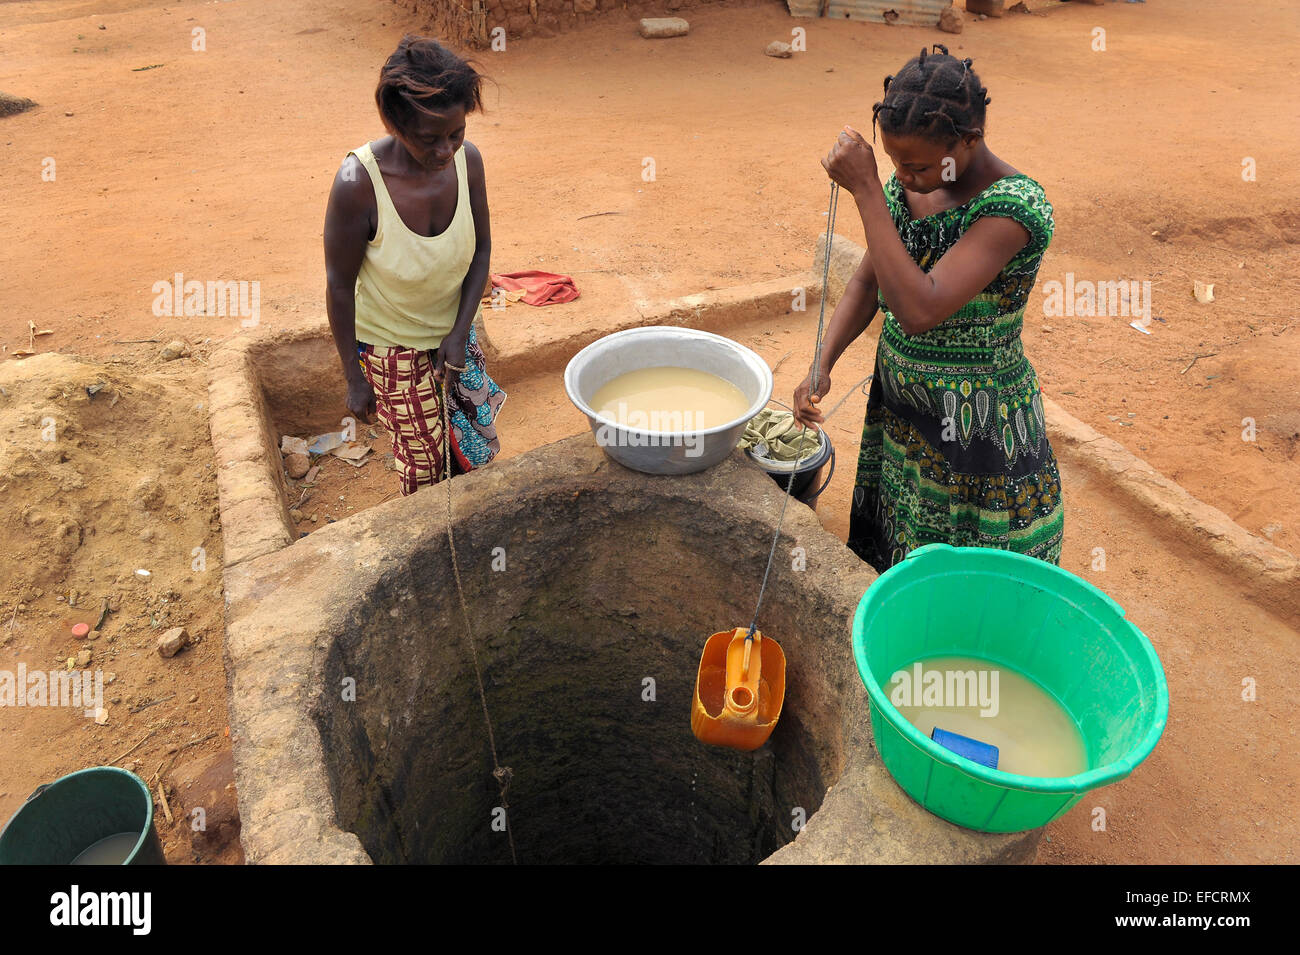 Two women draw dirty water from a nearly dry well in an arid region of Ghana. Stock Photo